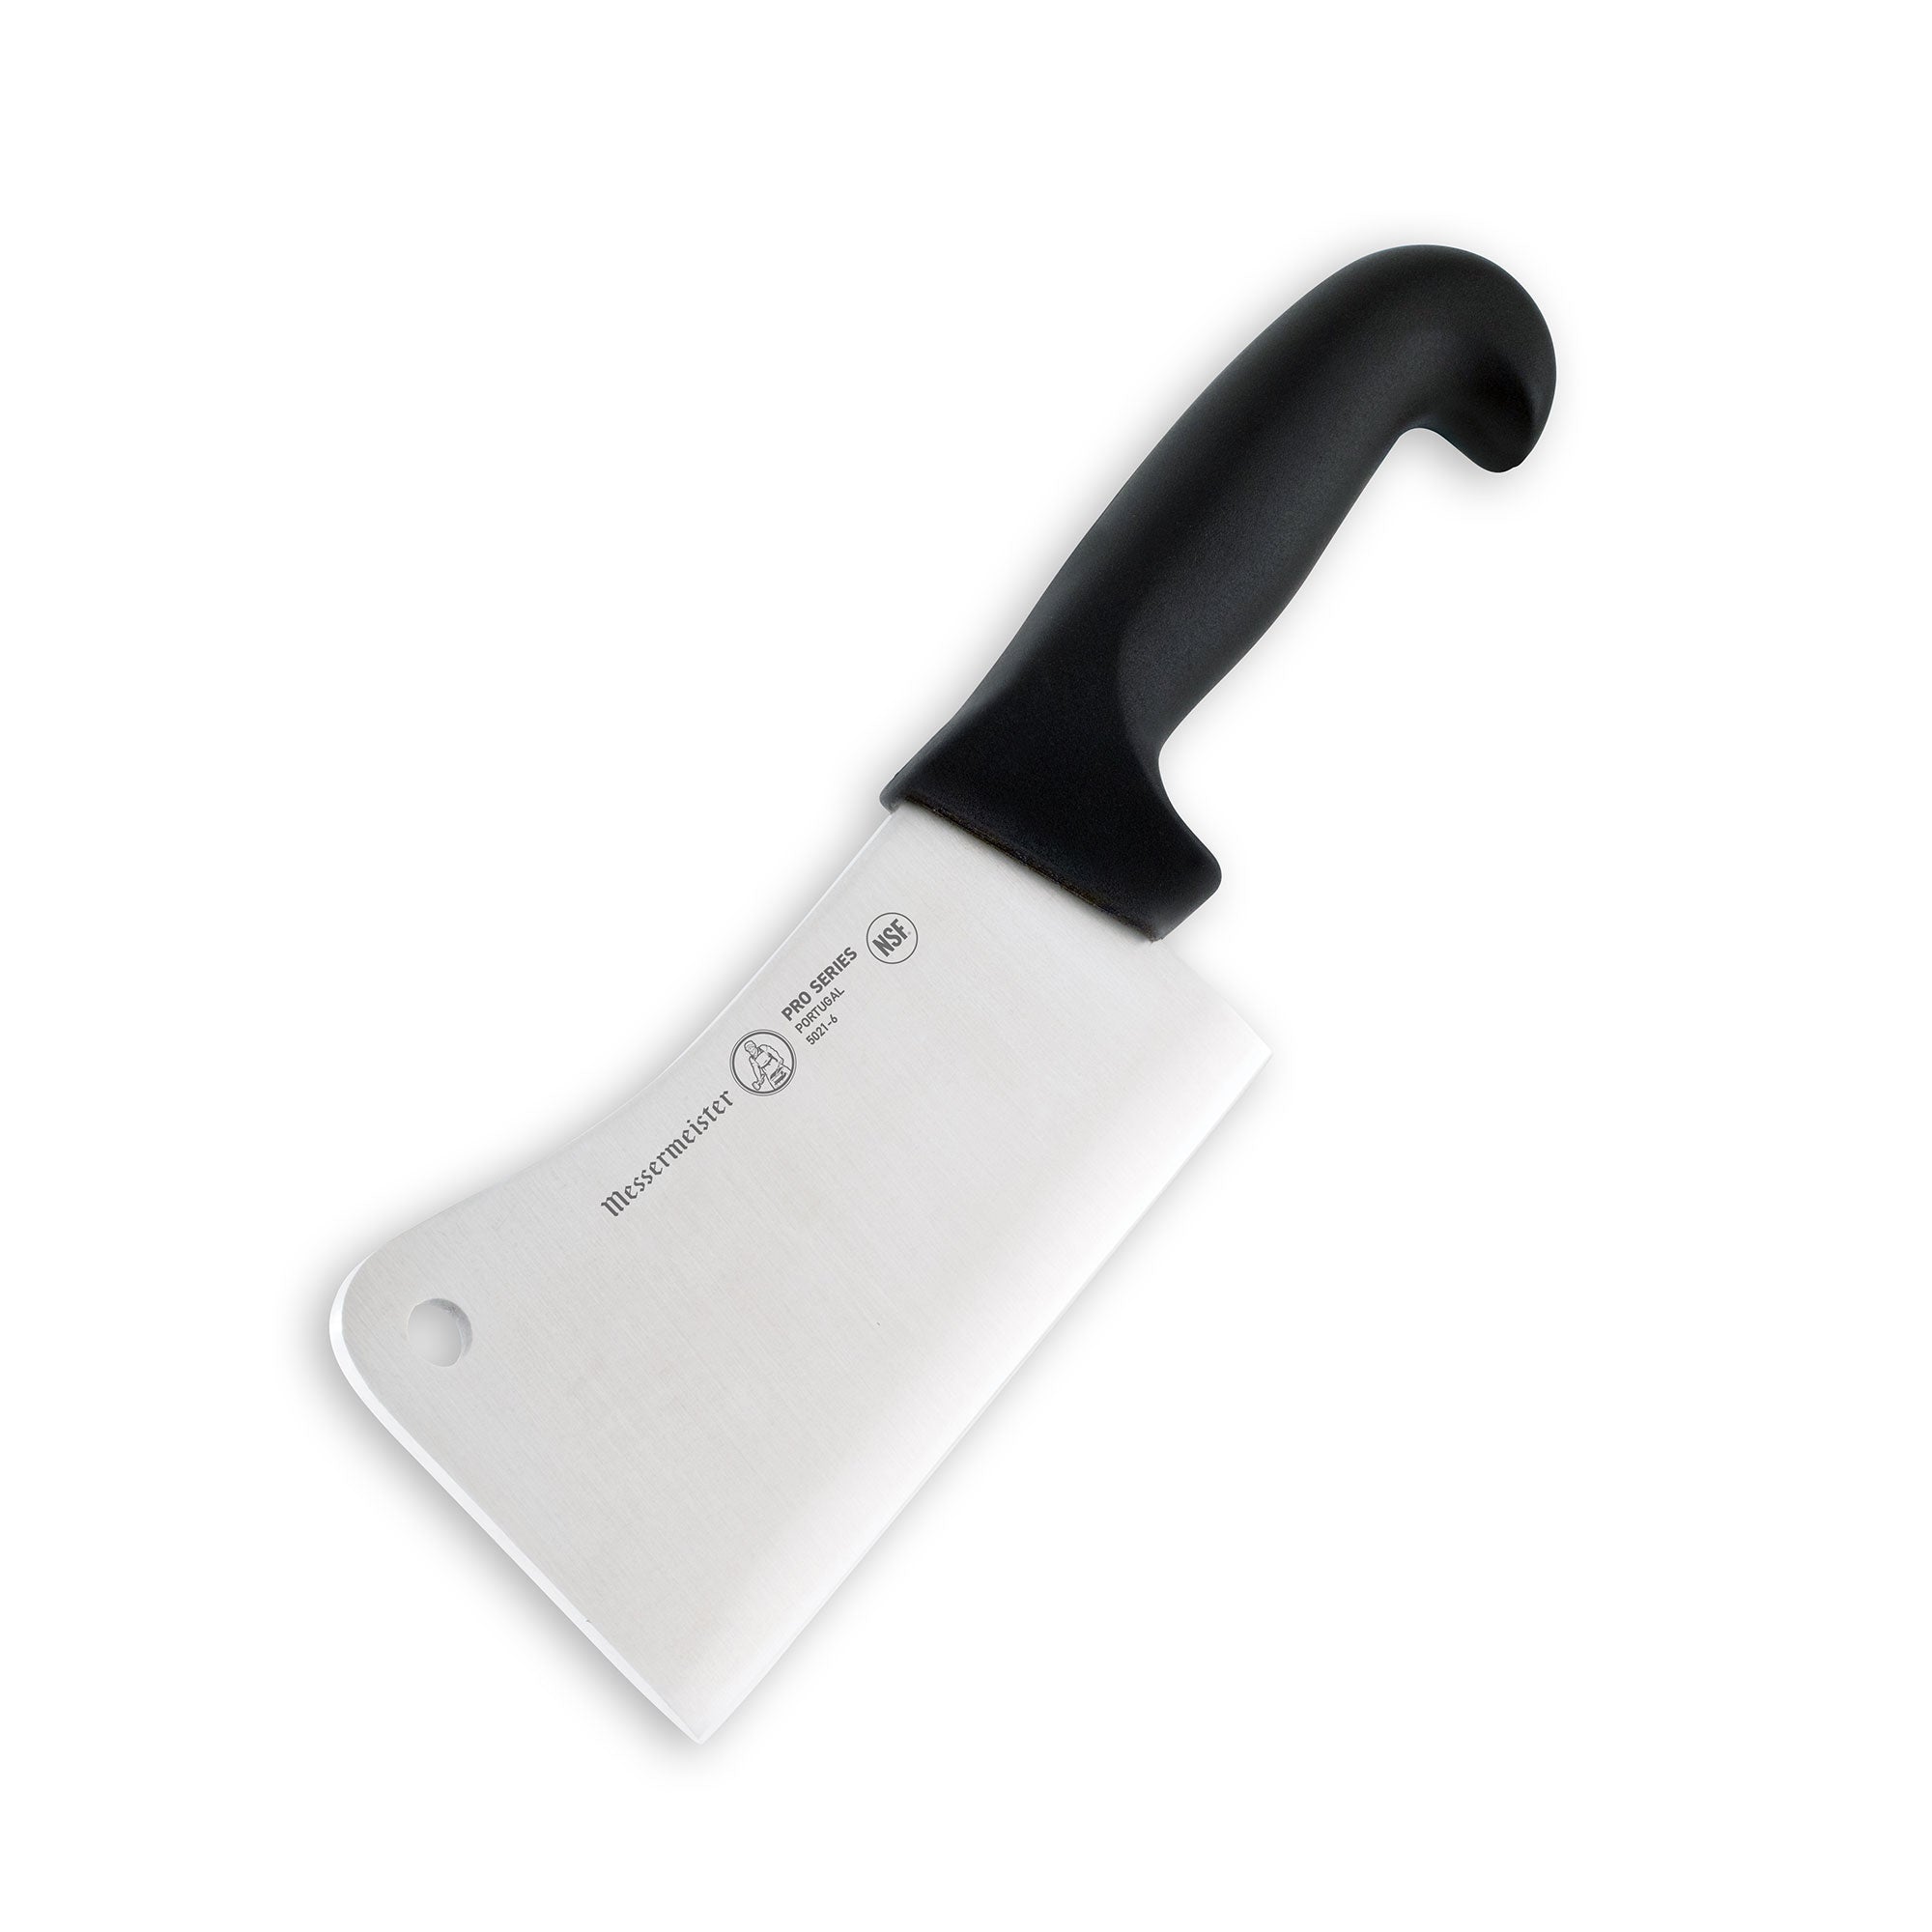 Boning Knife, Heavy Duty Professional Meat Cleaver, Stainless